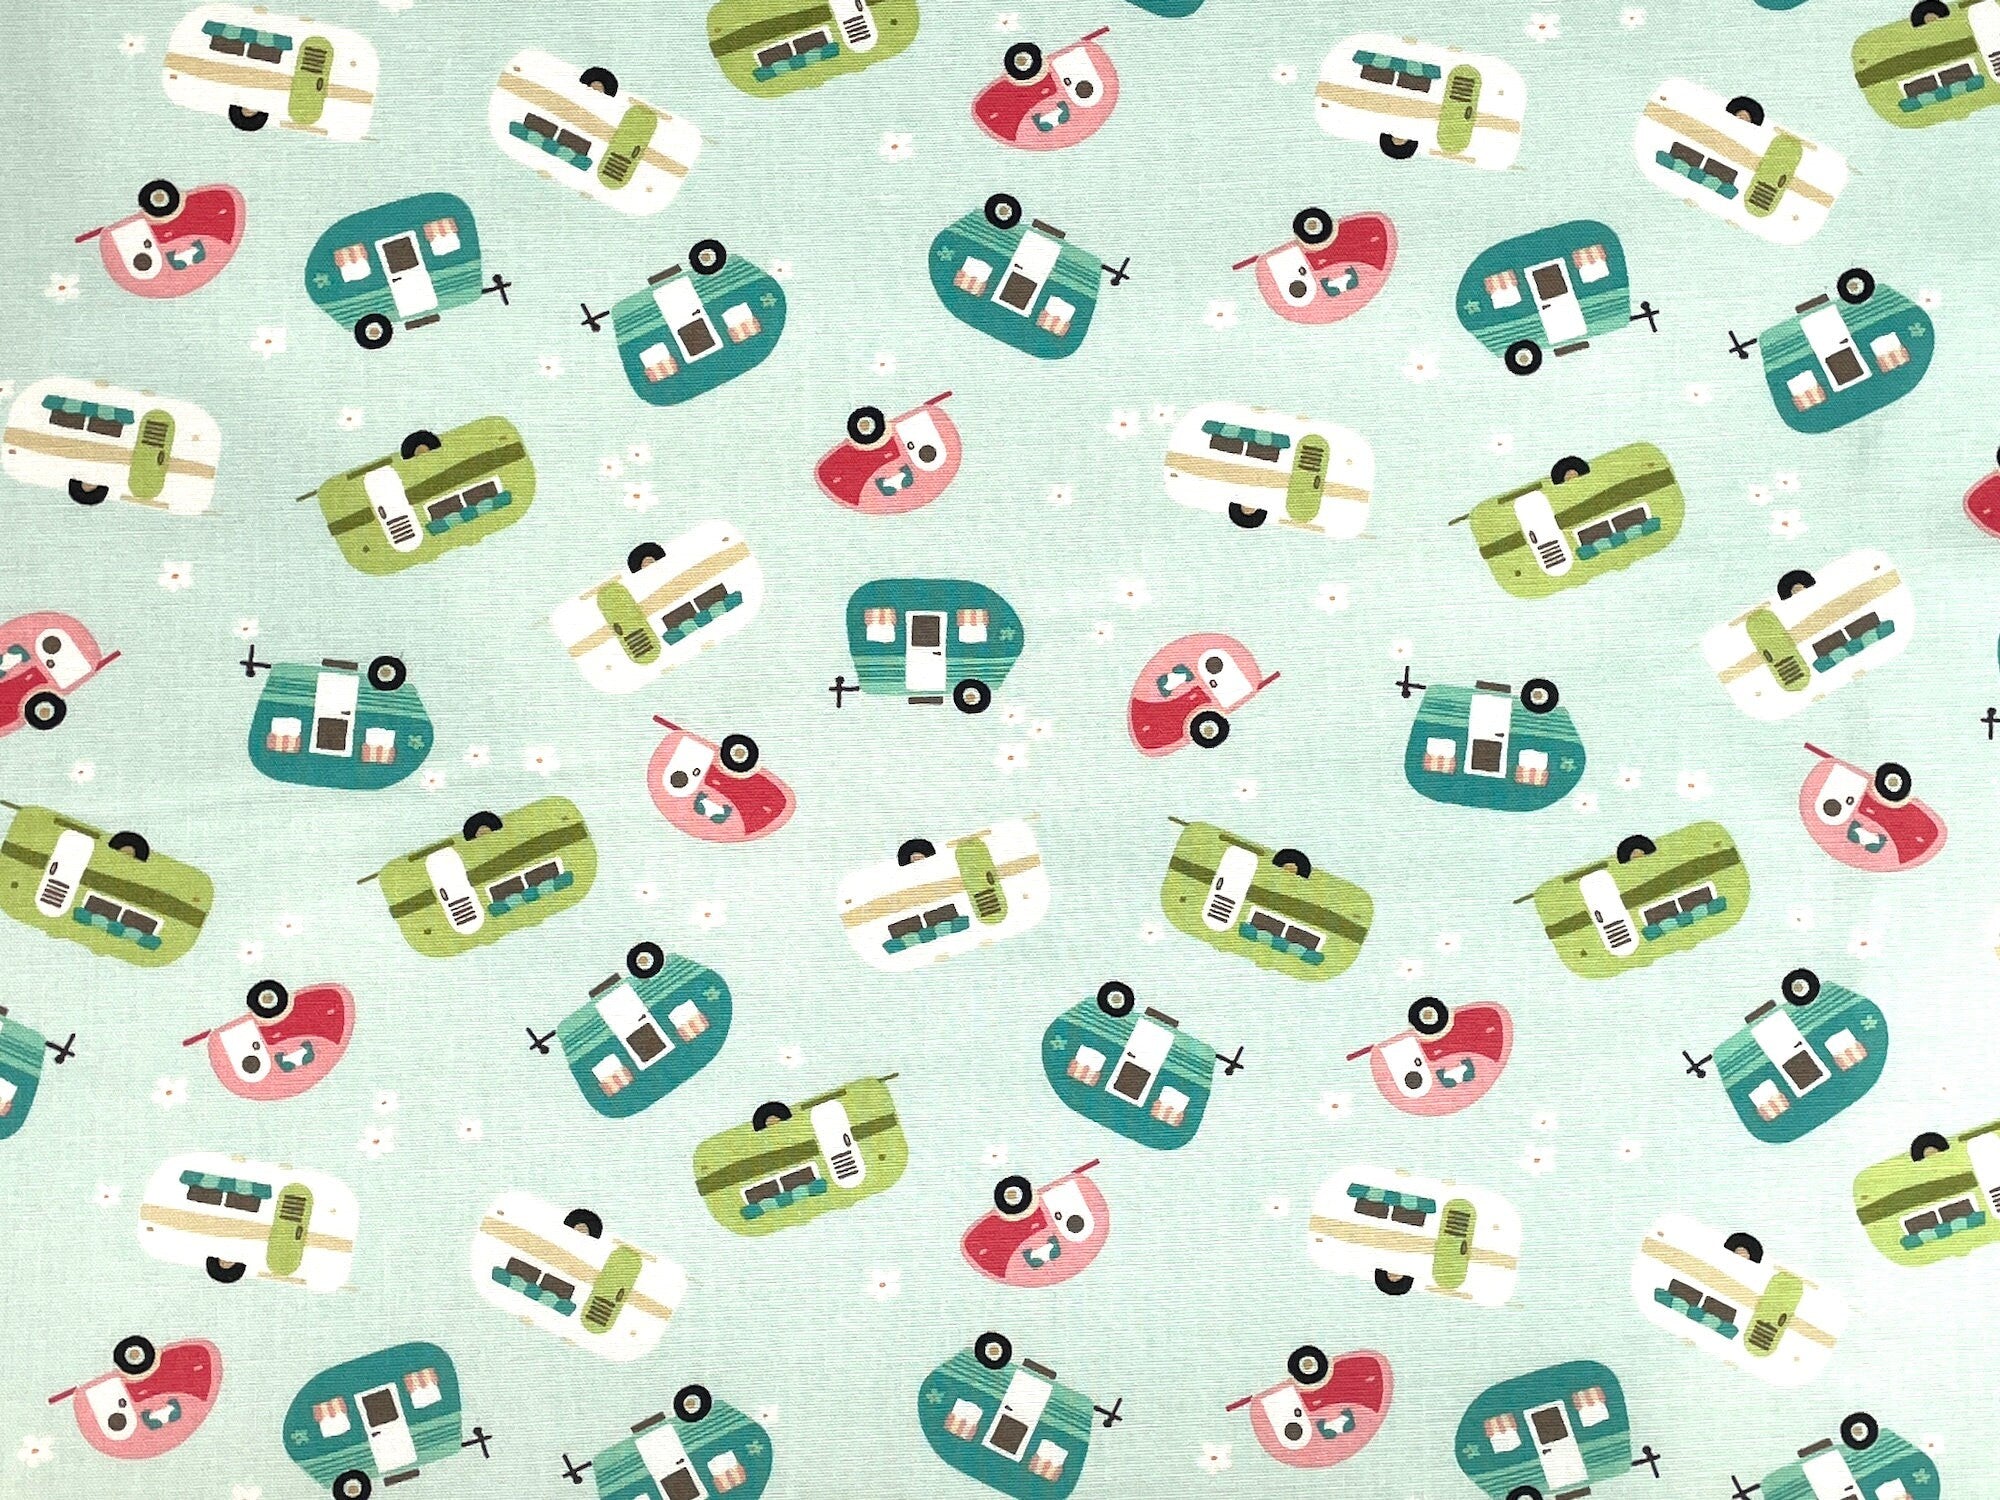 This fabric is called Glamp Camp Travel Trailers. Travel trailers in shades of green, turquoise, tan and pink are tossed over a mint green background.